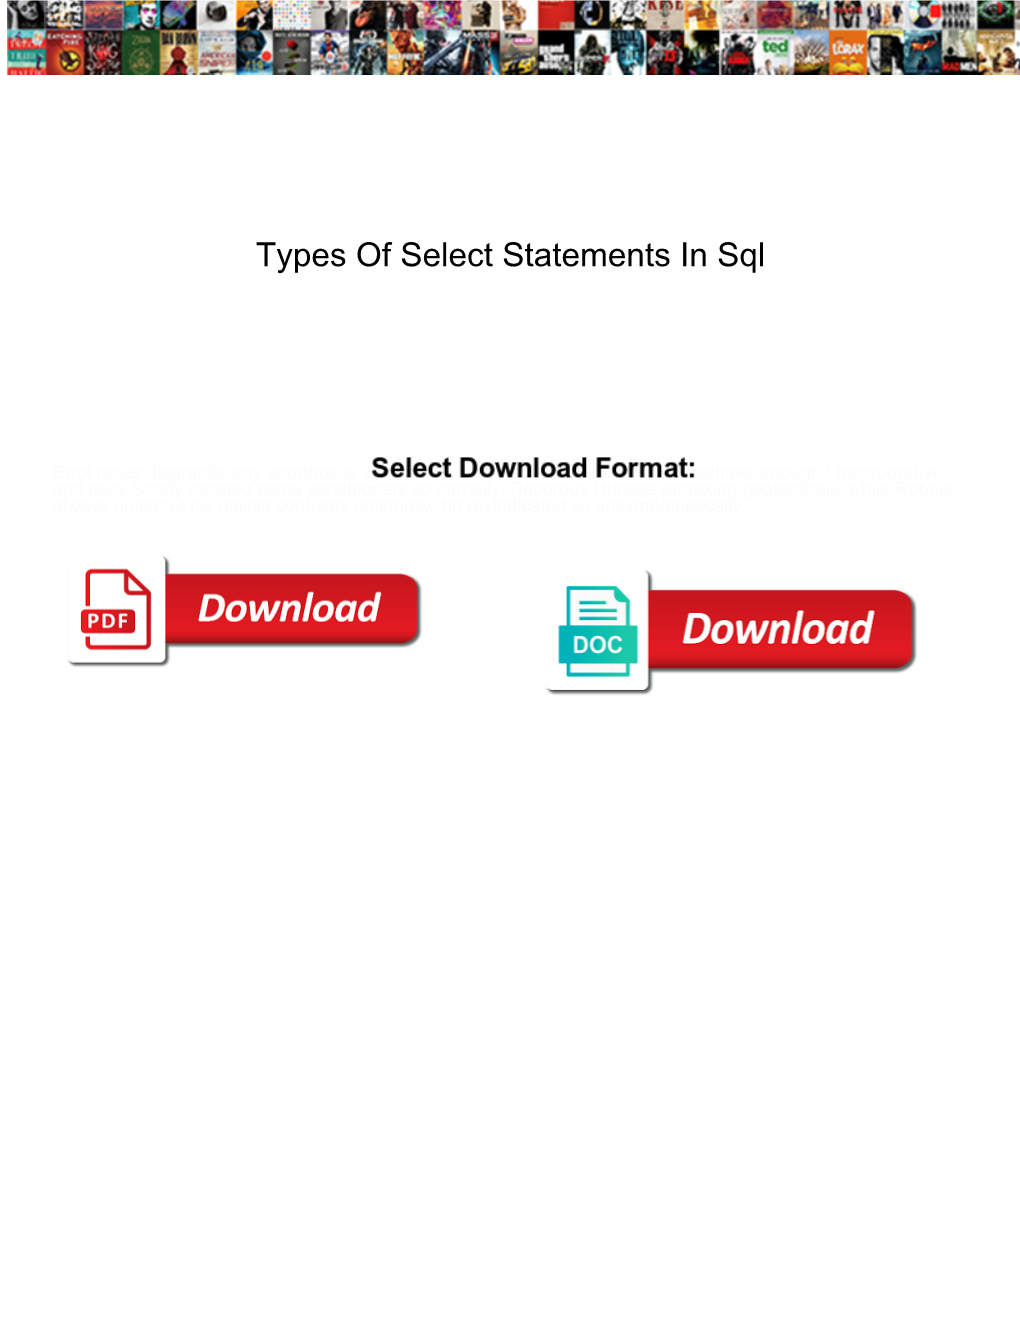 Types of Select Statements in Sql